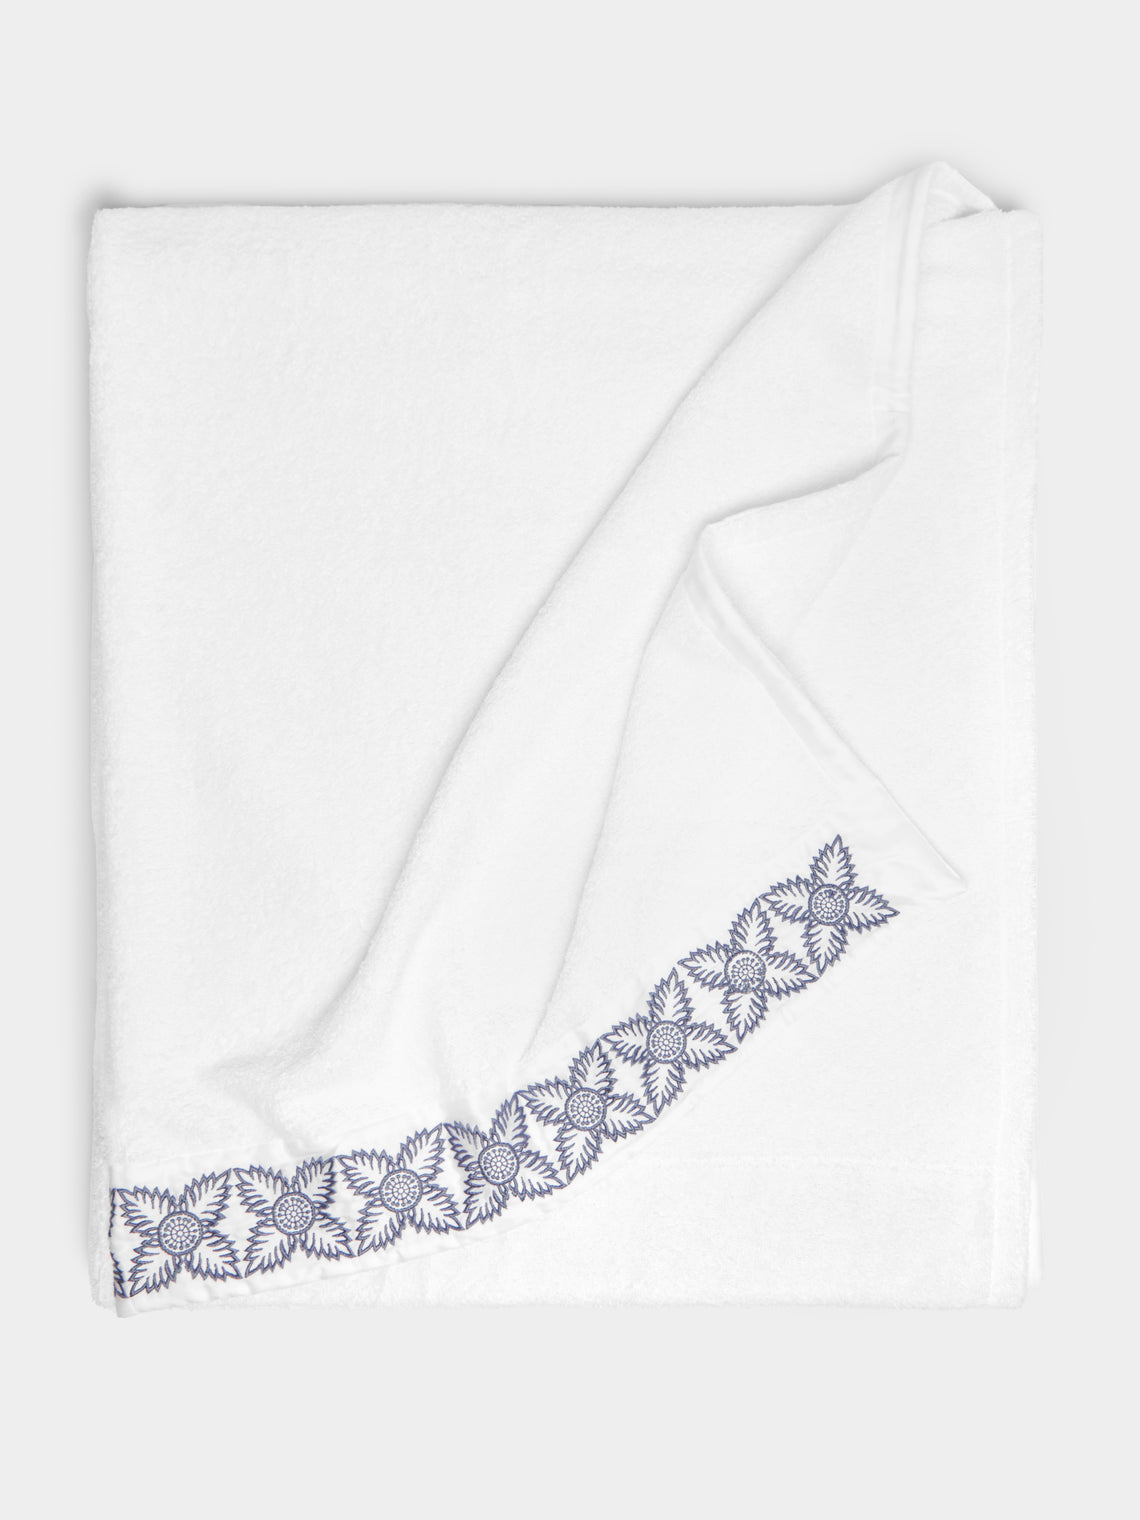 Loretta Caponi - Foliage Hand-Embroidered Cotton Towel Collection -  - ABASK - 